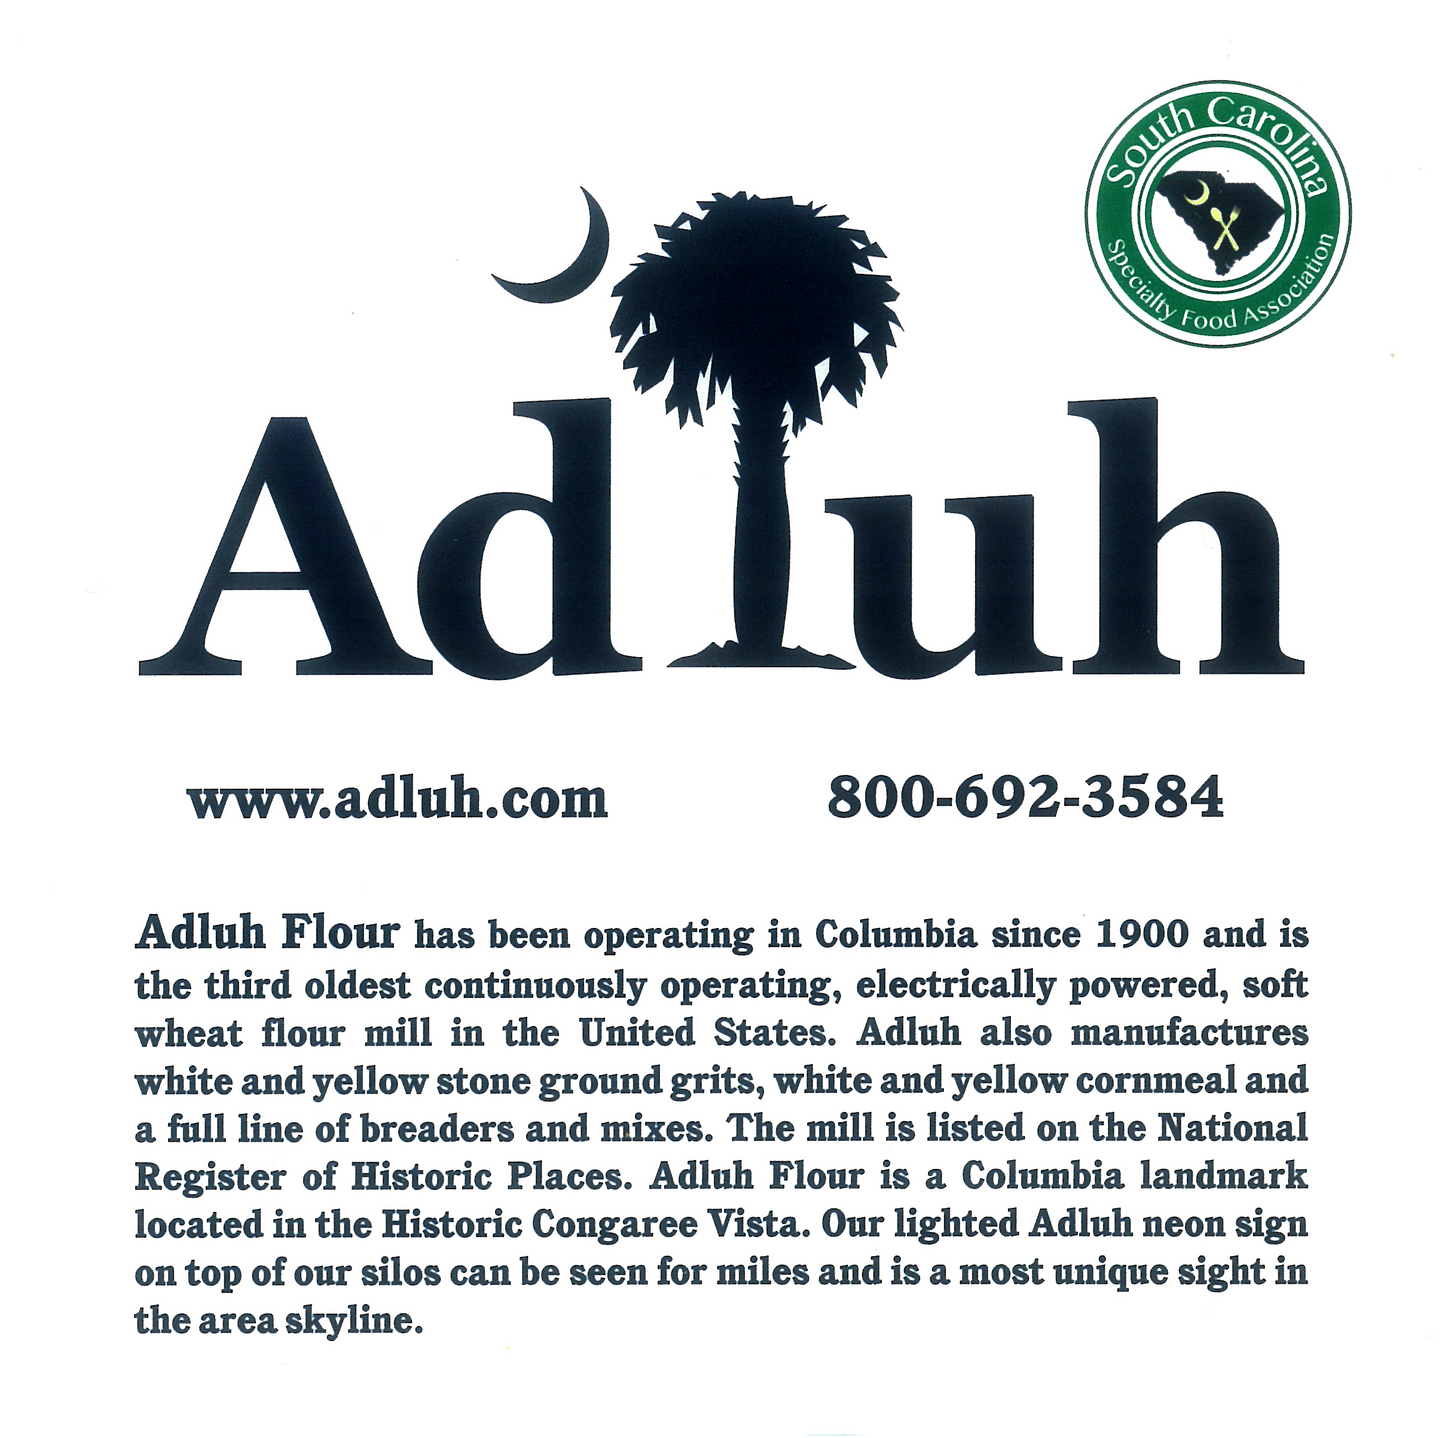 Adluh Sample Pack - Six 1 pound bags